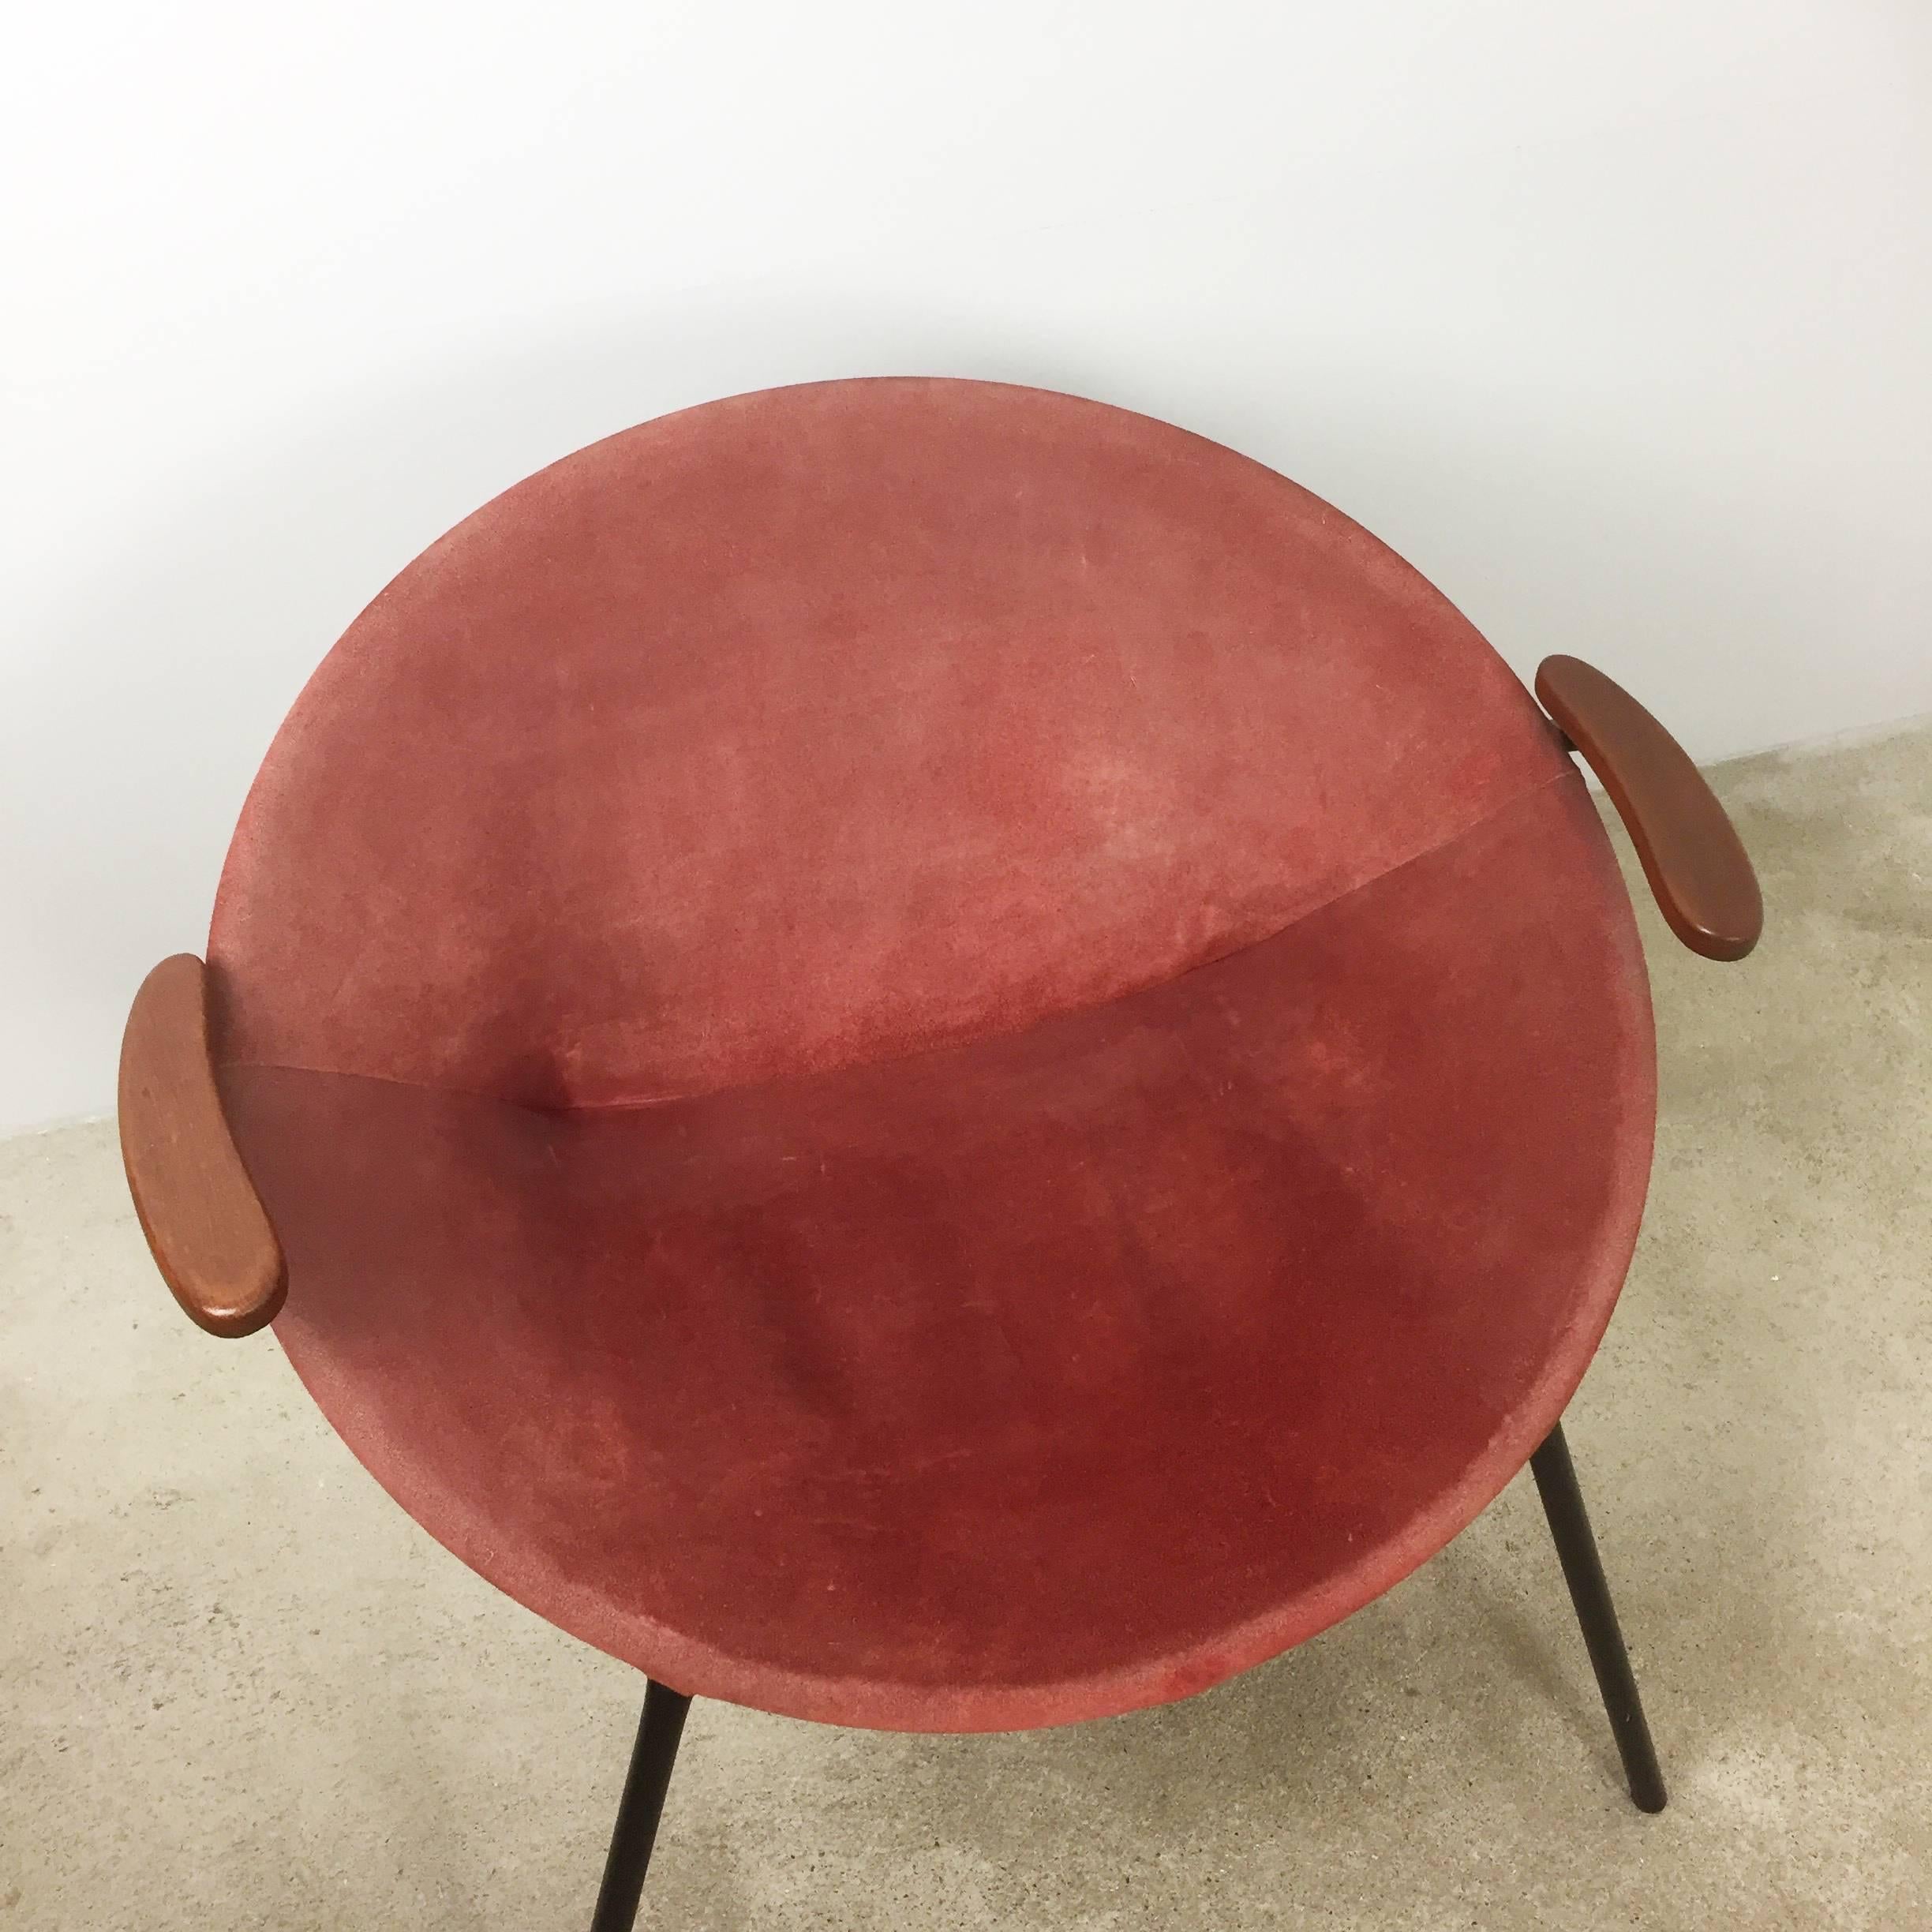 Vintage 1950s Real Red Leather Balloon Easy Chair by Hans Olsen for LEA, Denmark 1